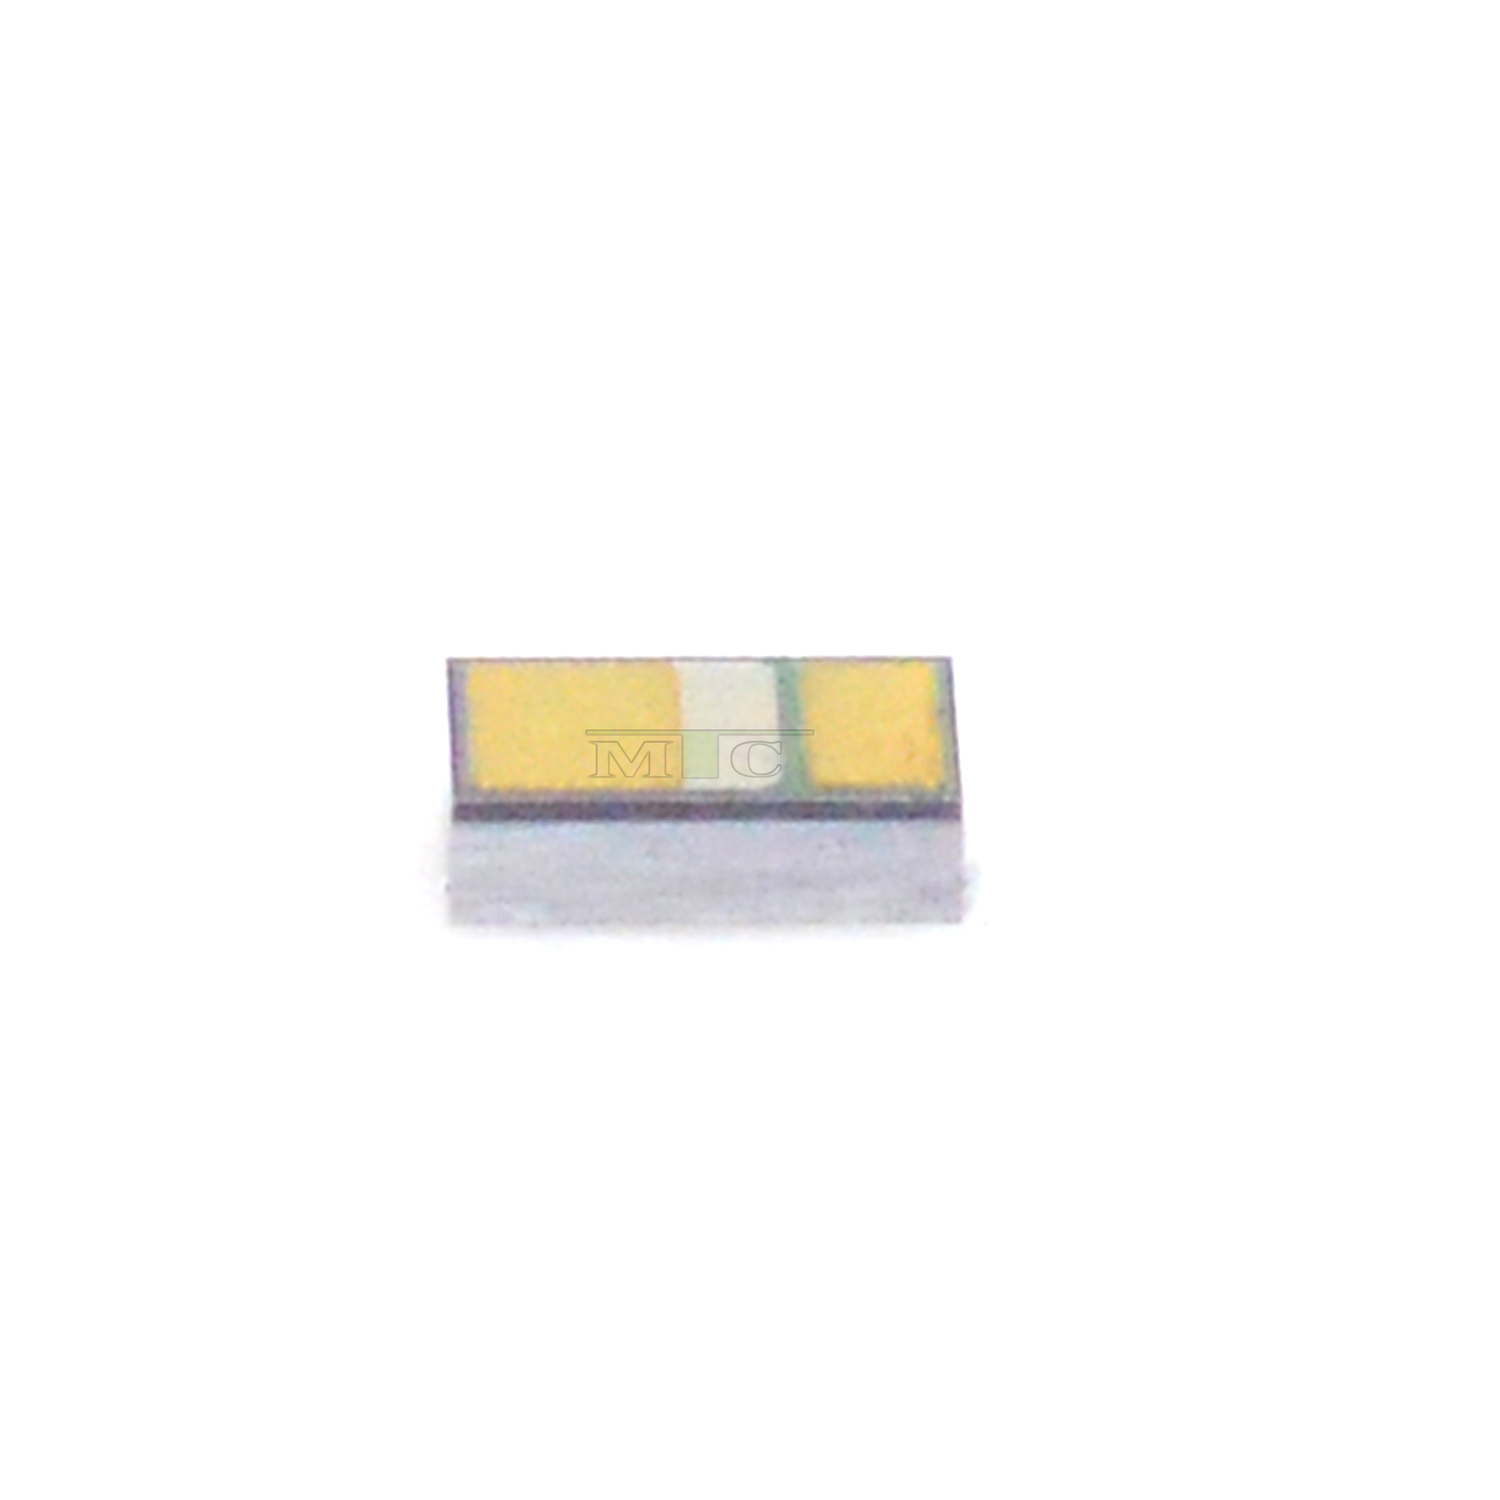 iPhone 6s/6s Plus Backlight Diode D4021